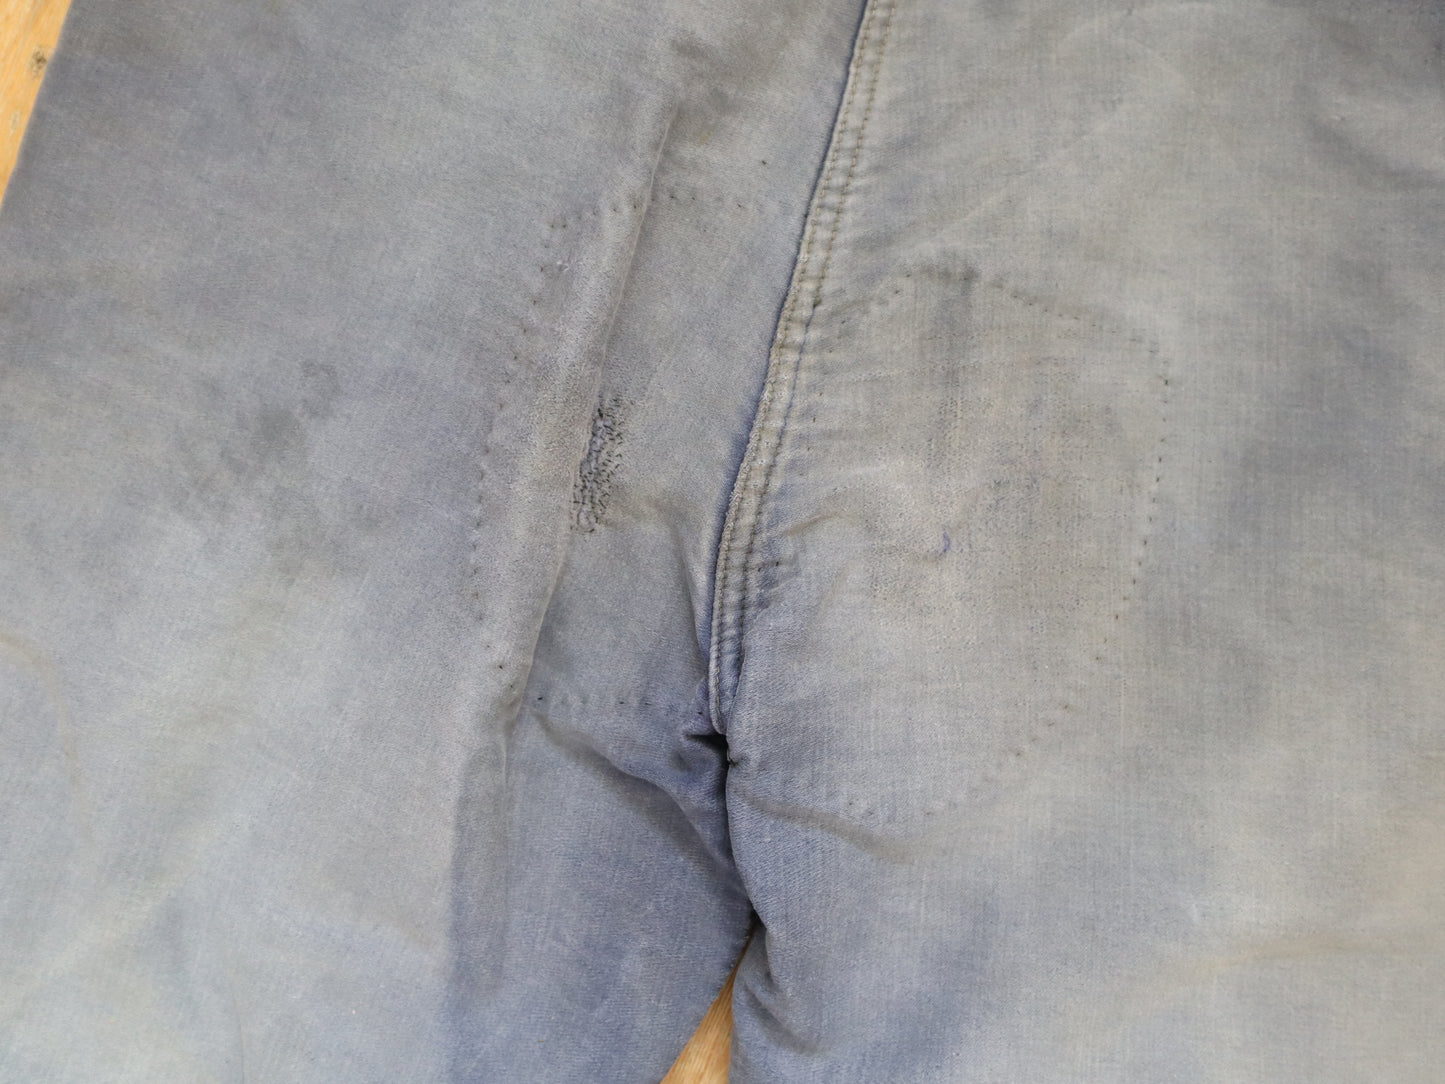 1950s French Le Salvetal Blue Moleskin Workwear Trousers Pants Patched Repairs Darned